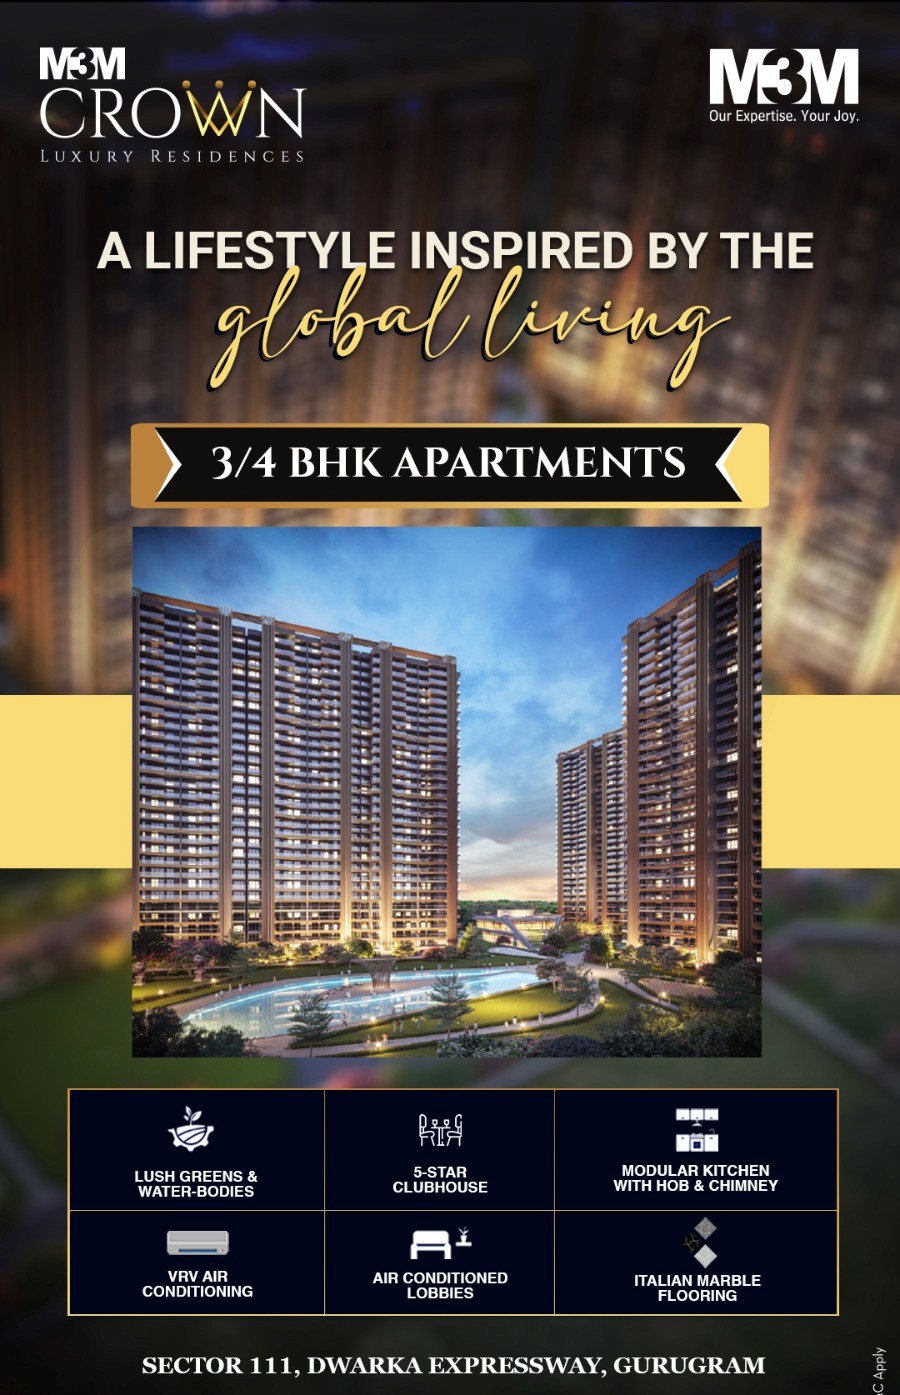 Luxurious 3 and 4 BHK apartments at M3M Crown in Dwarka Expressway, Gurgaon Update